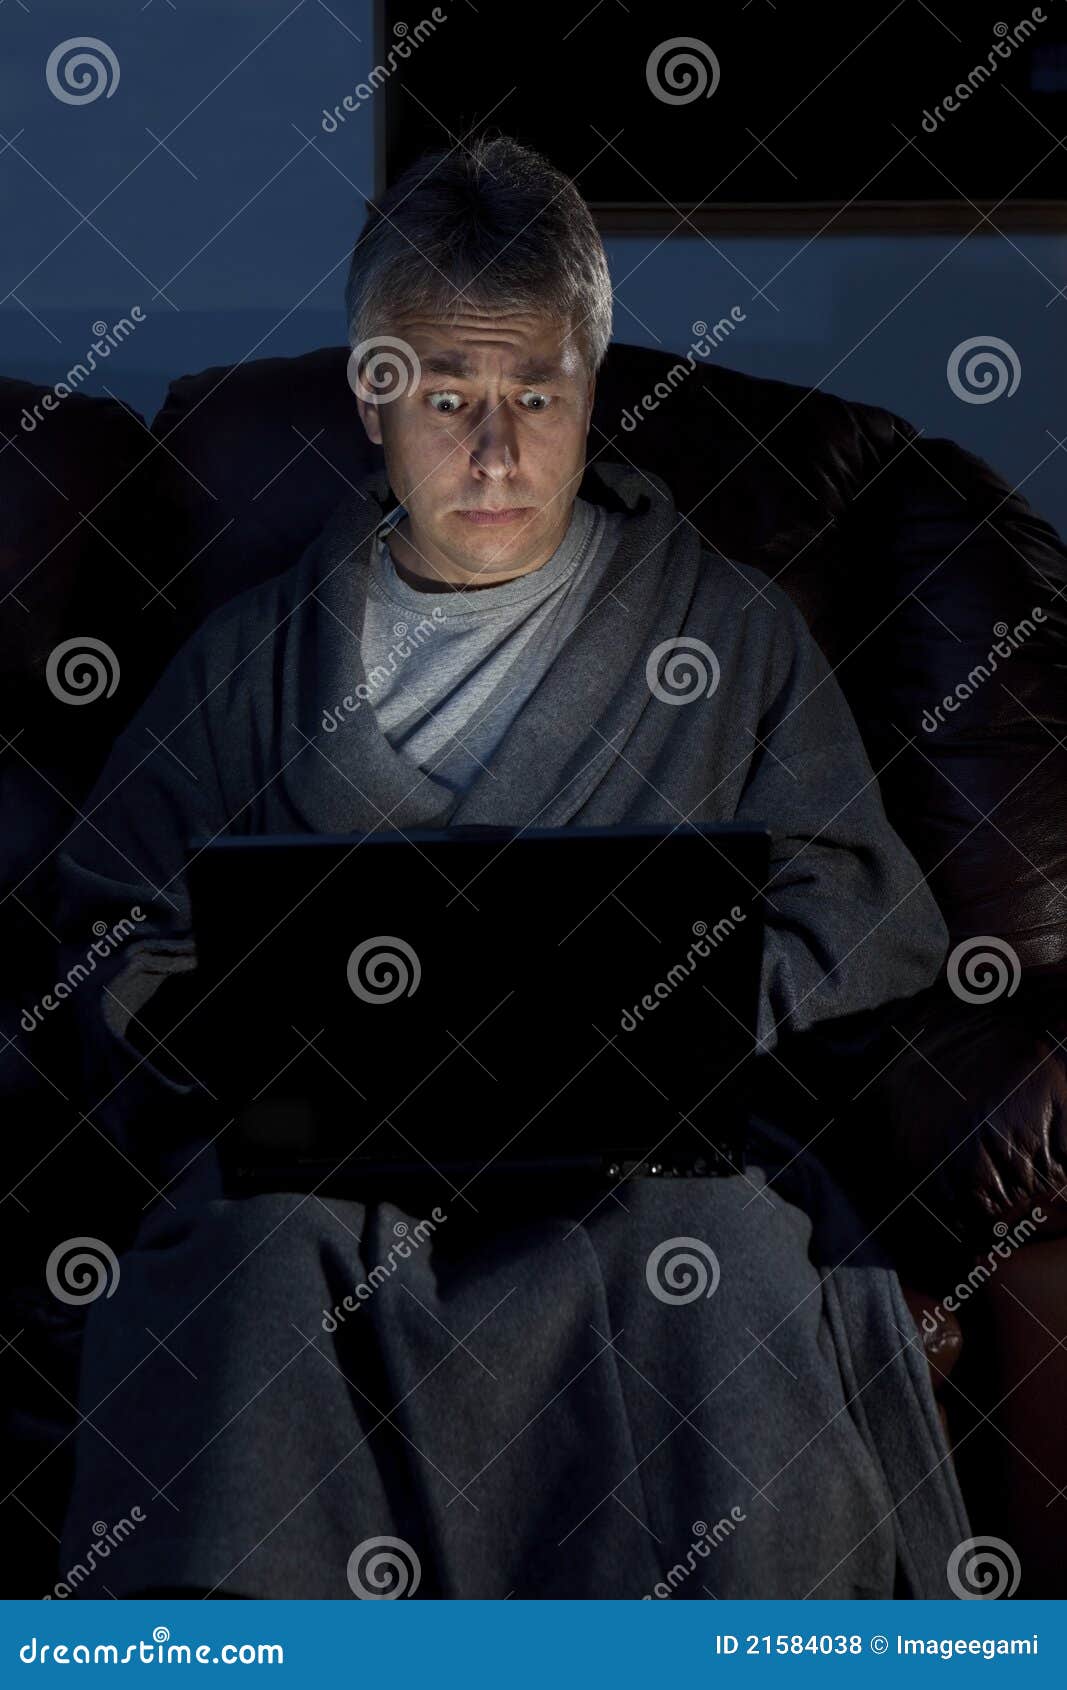 man in housecoat working late series